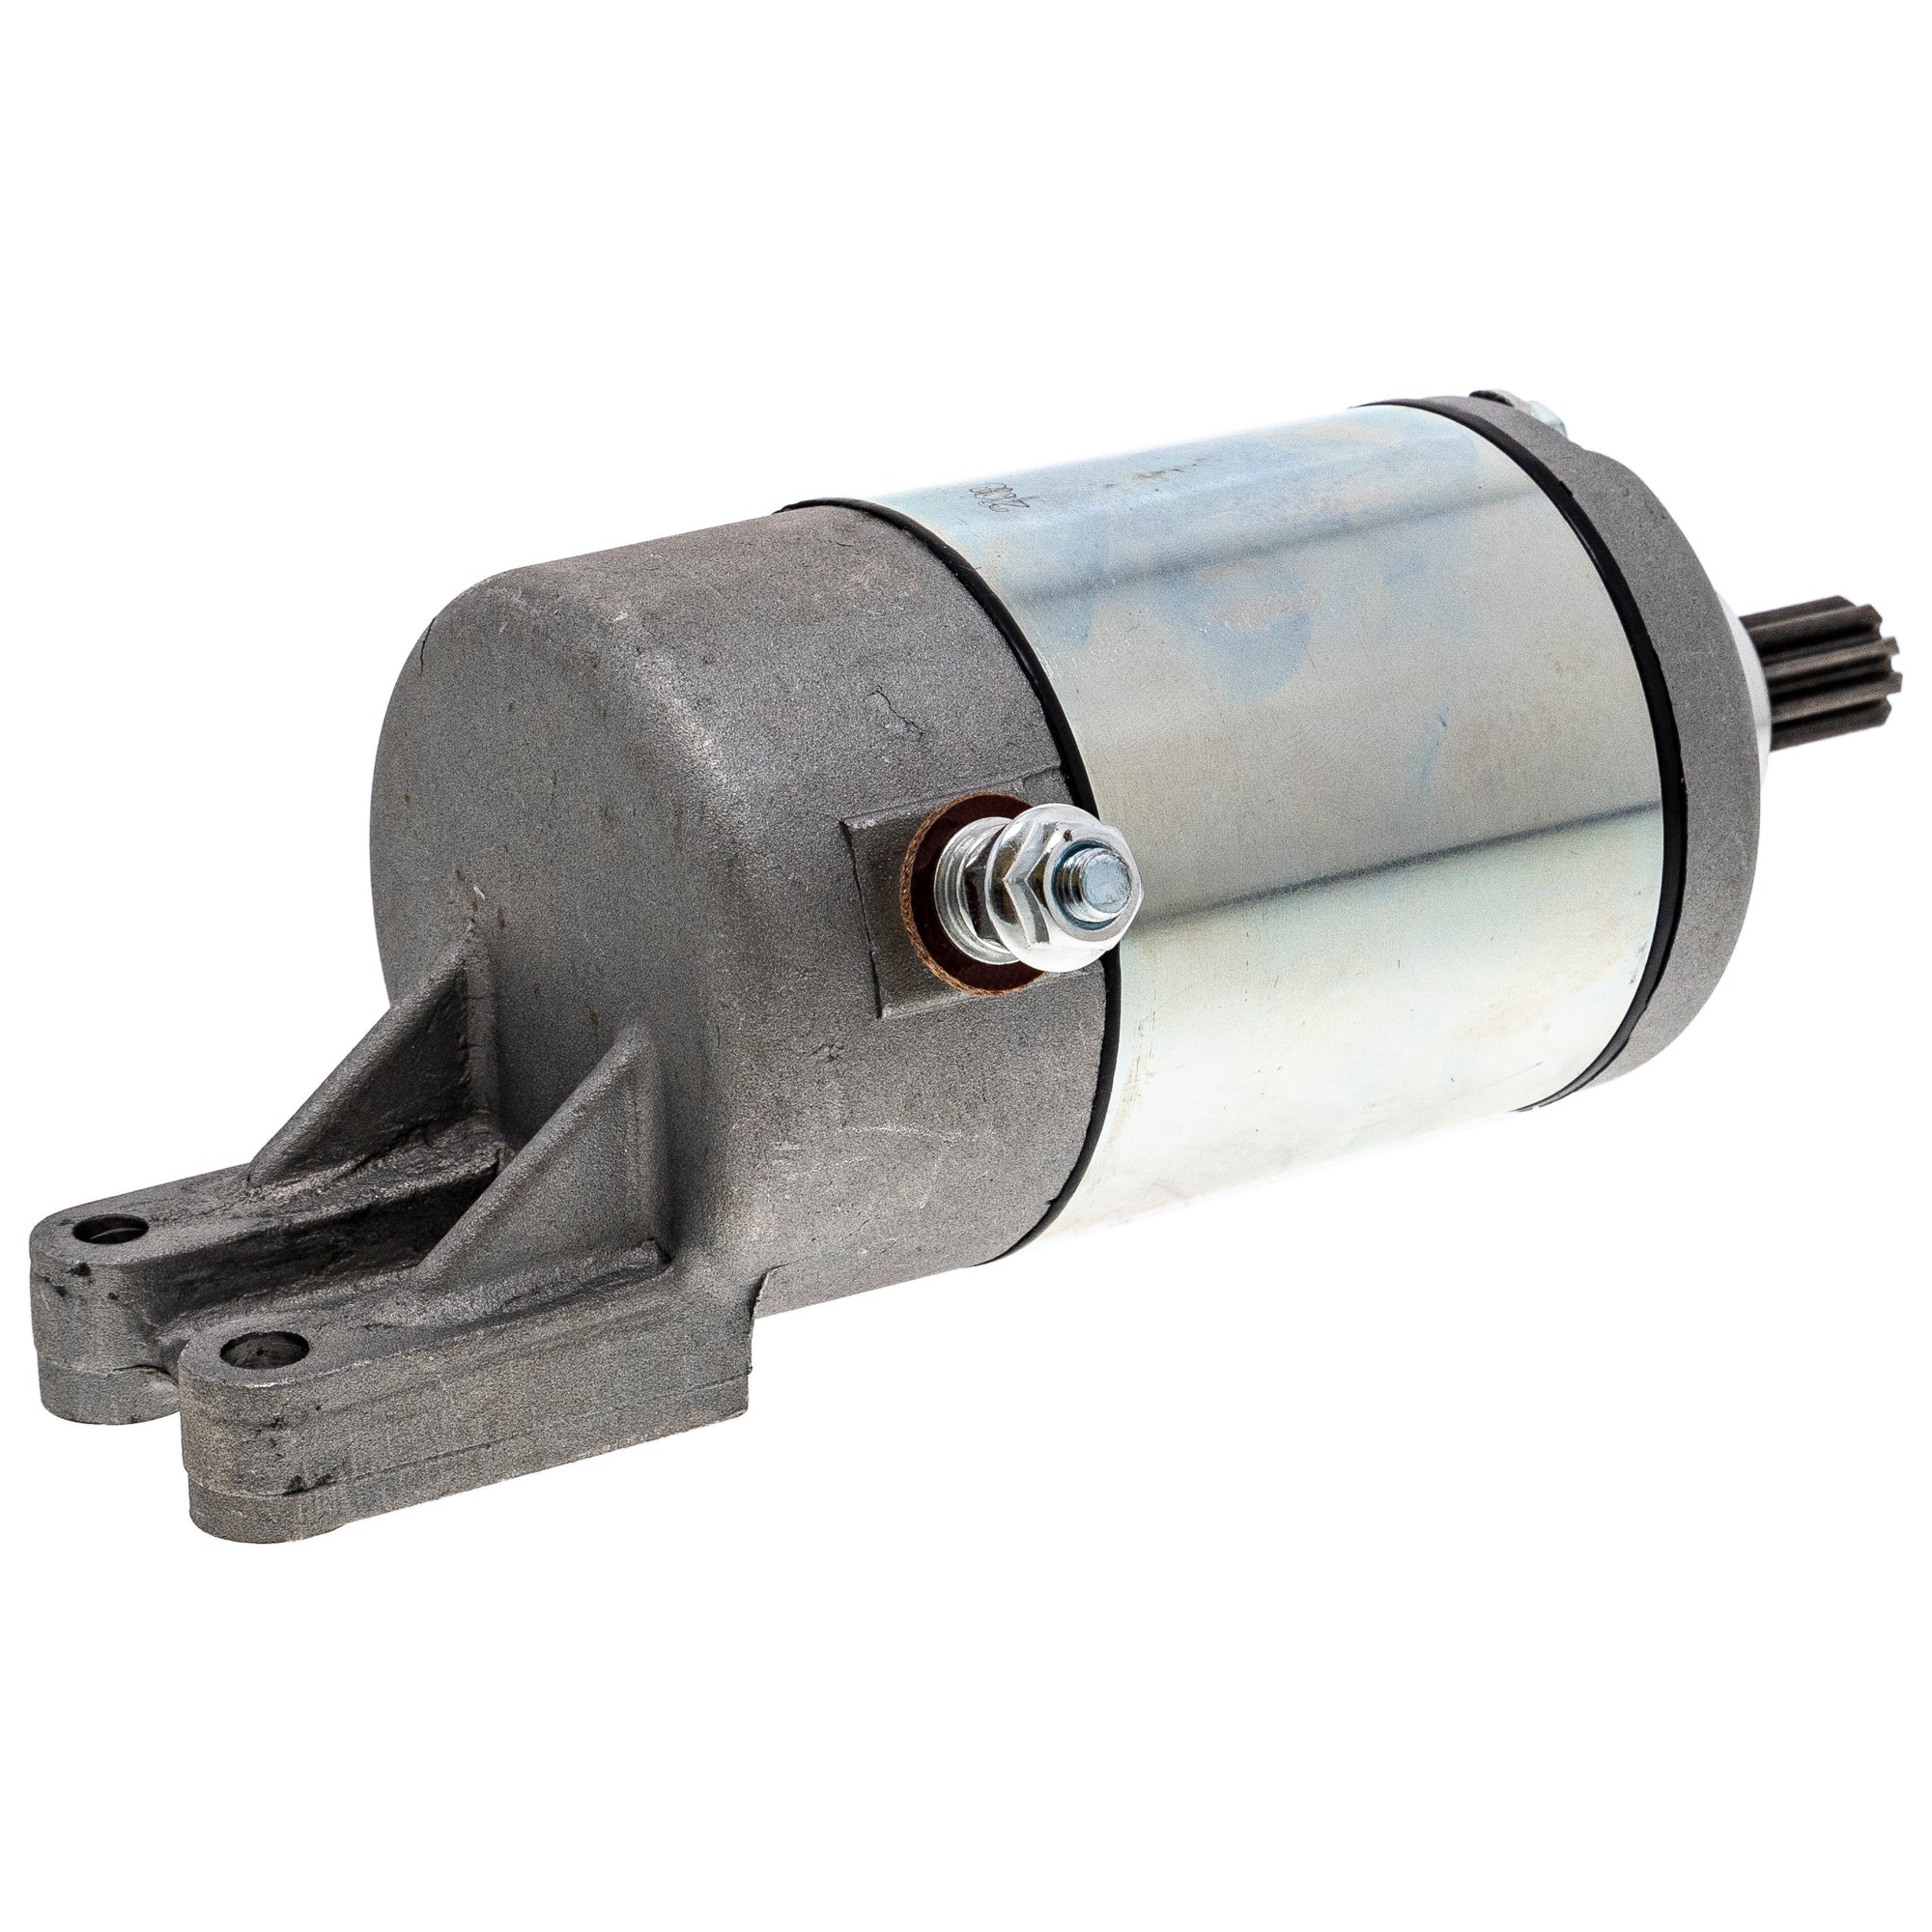 Starter Motor Assembly 519-CSM2345O For Can-Am Bombardier 420684283 420684282 420684280